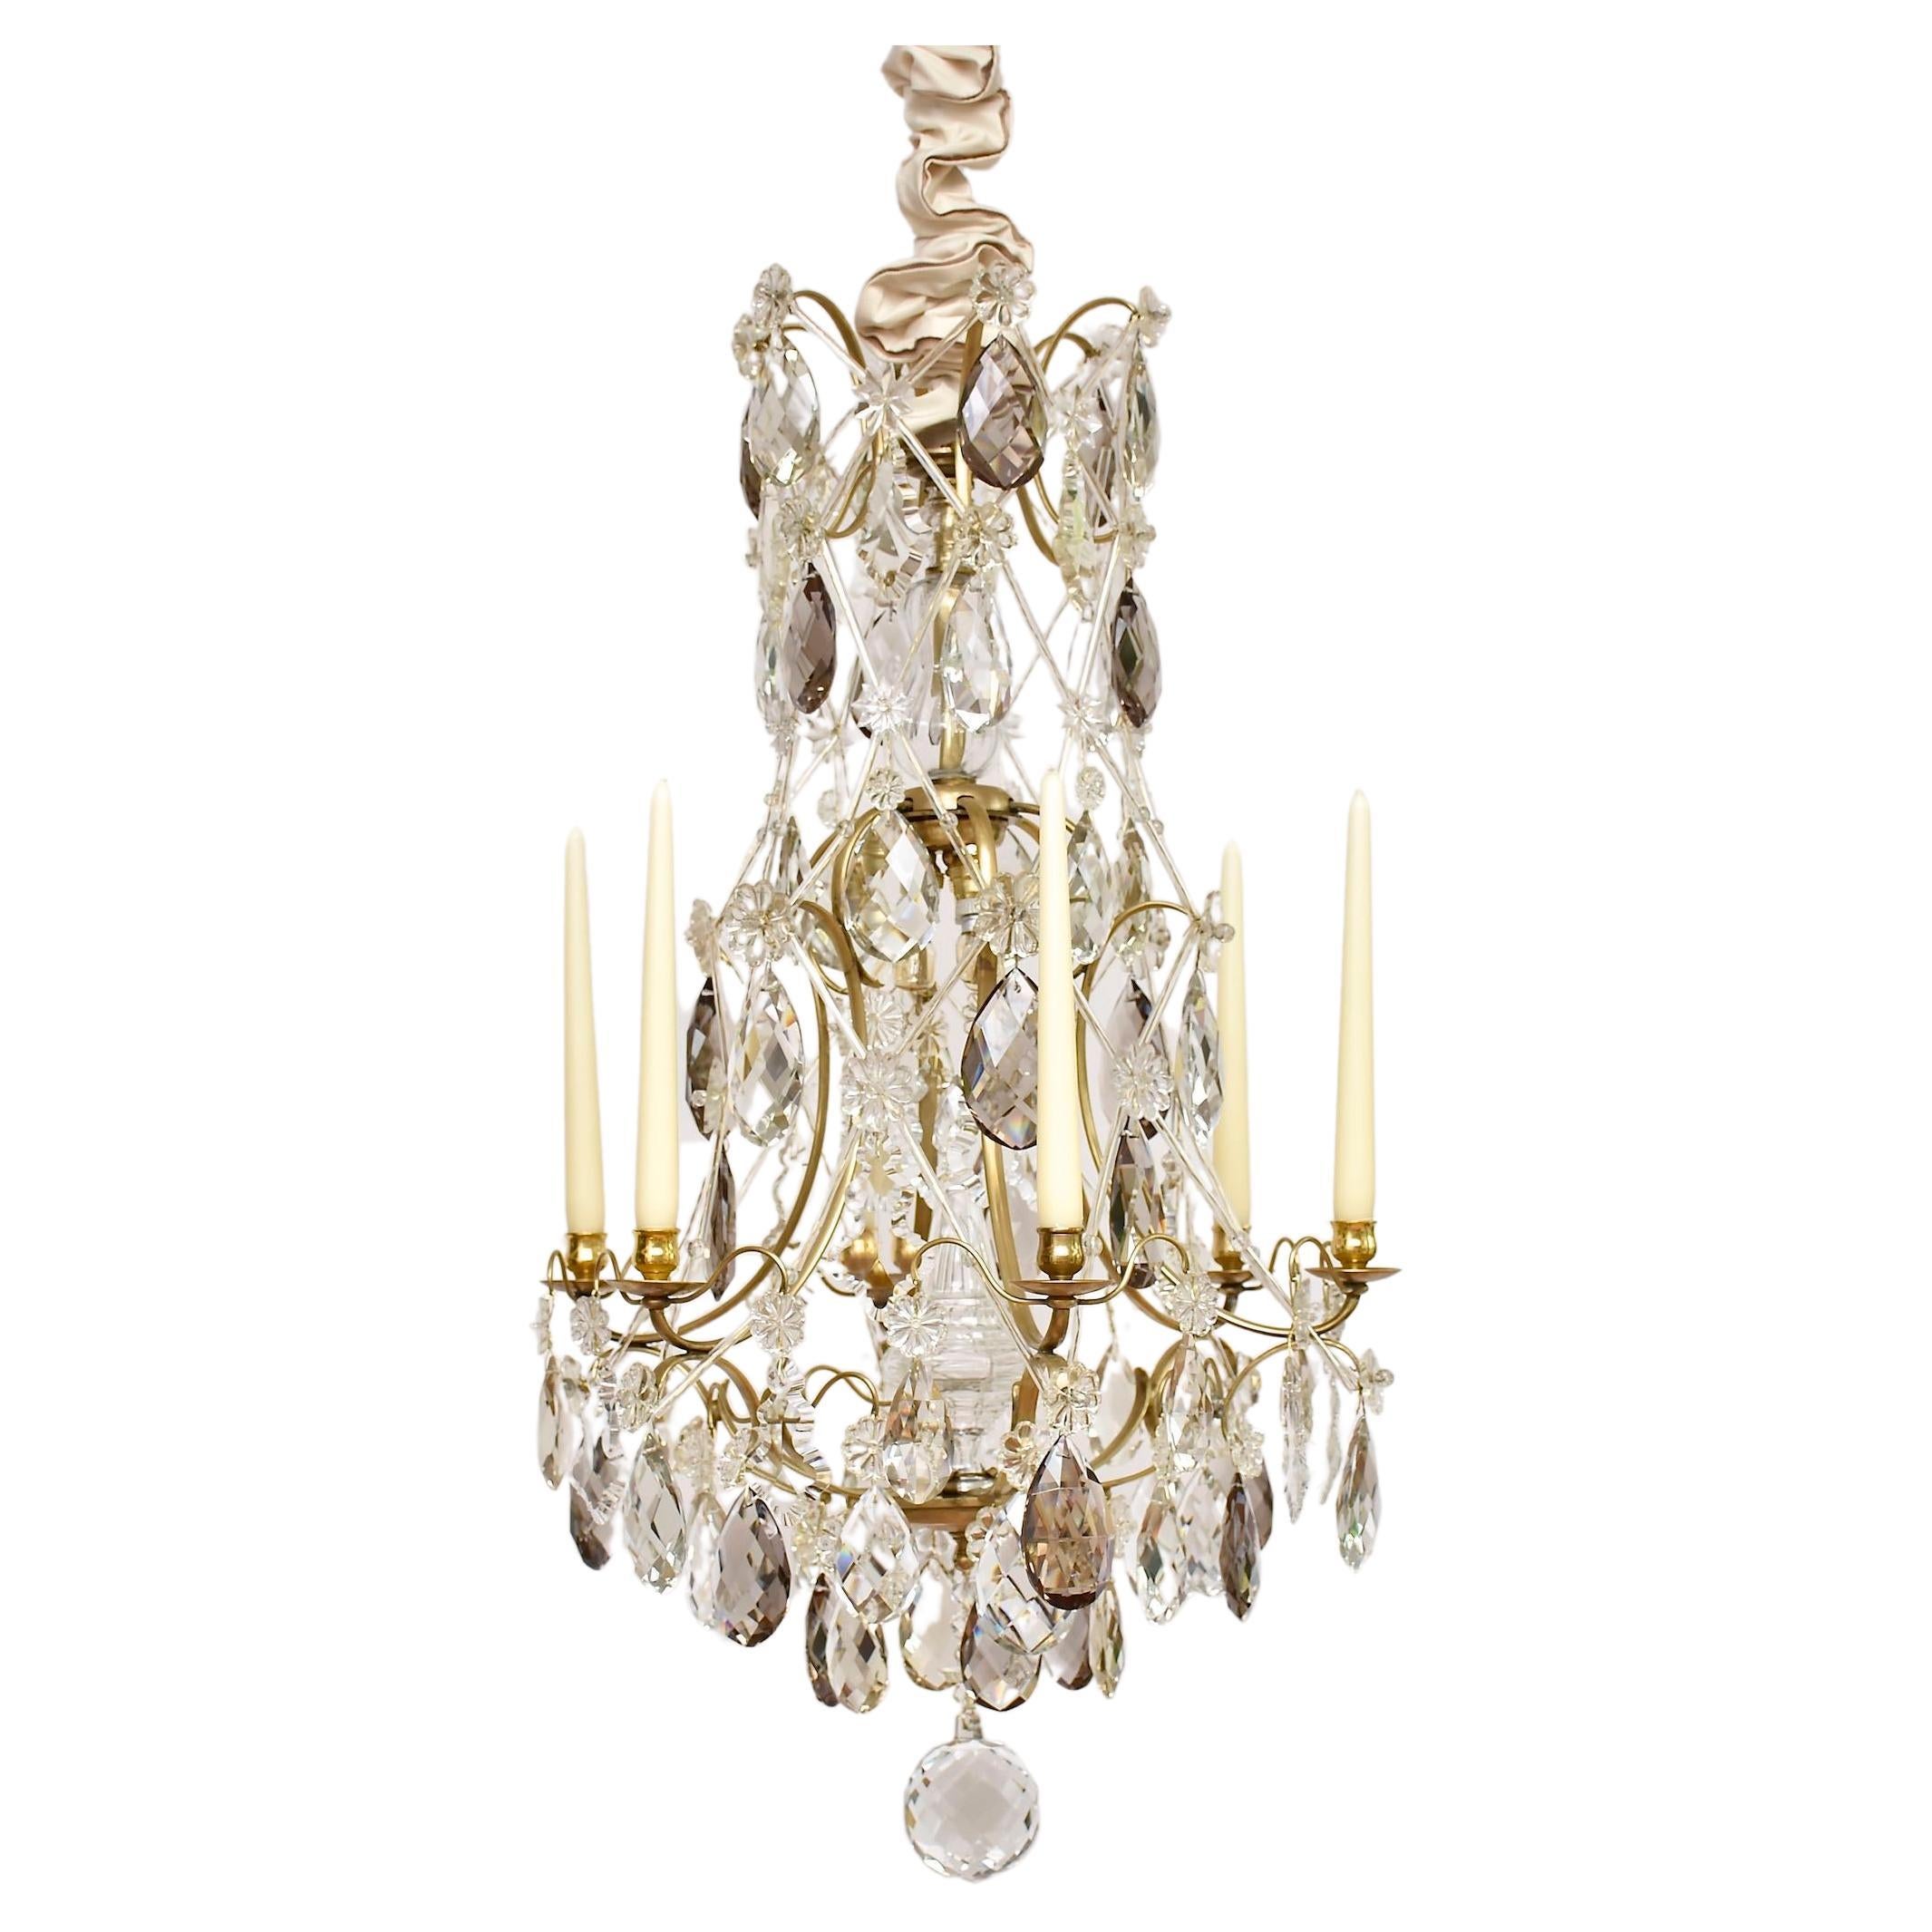 Rococo style brass and crystal chandelier